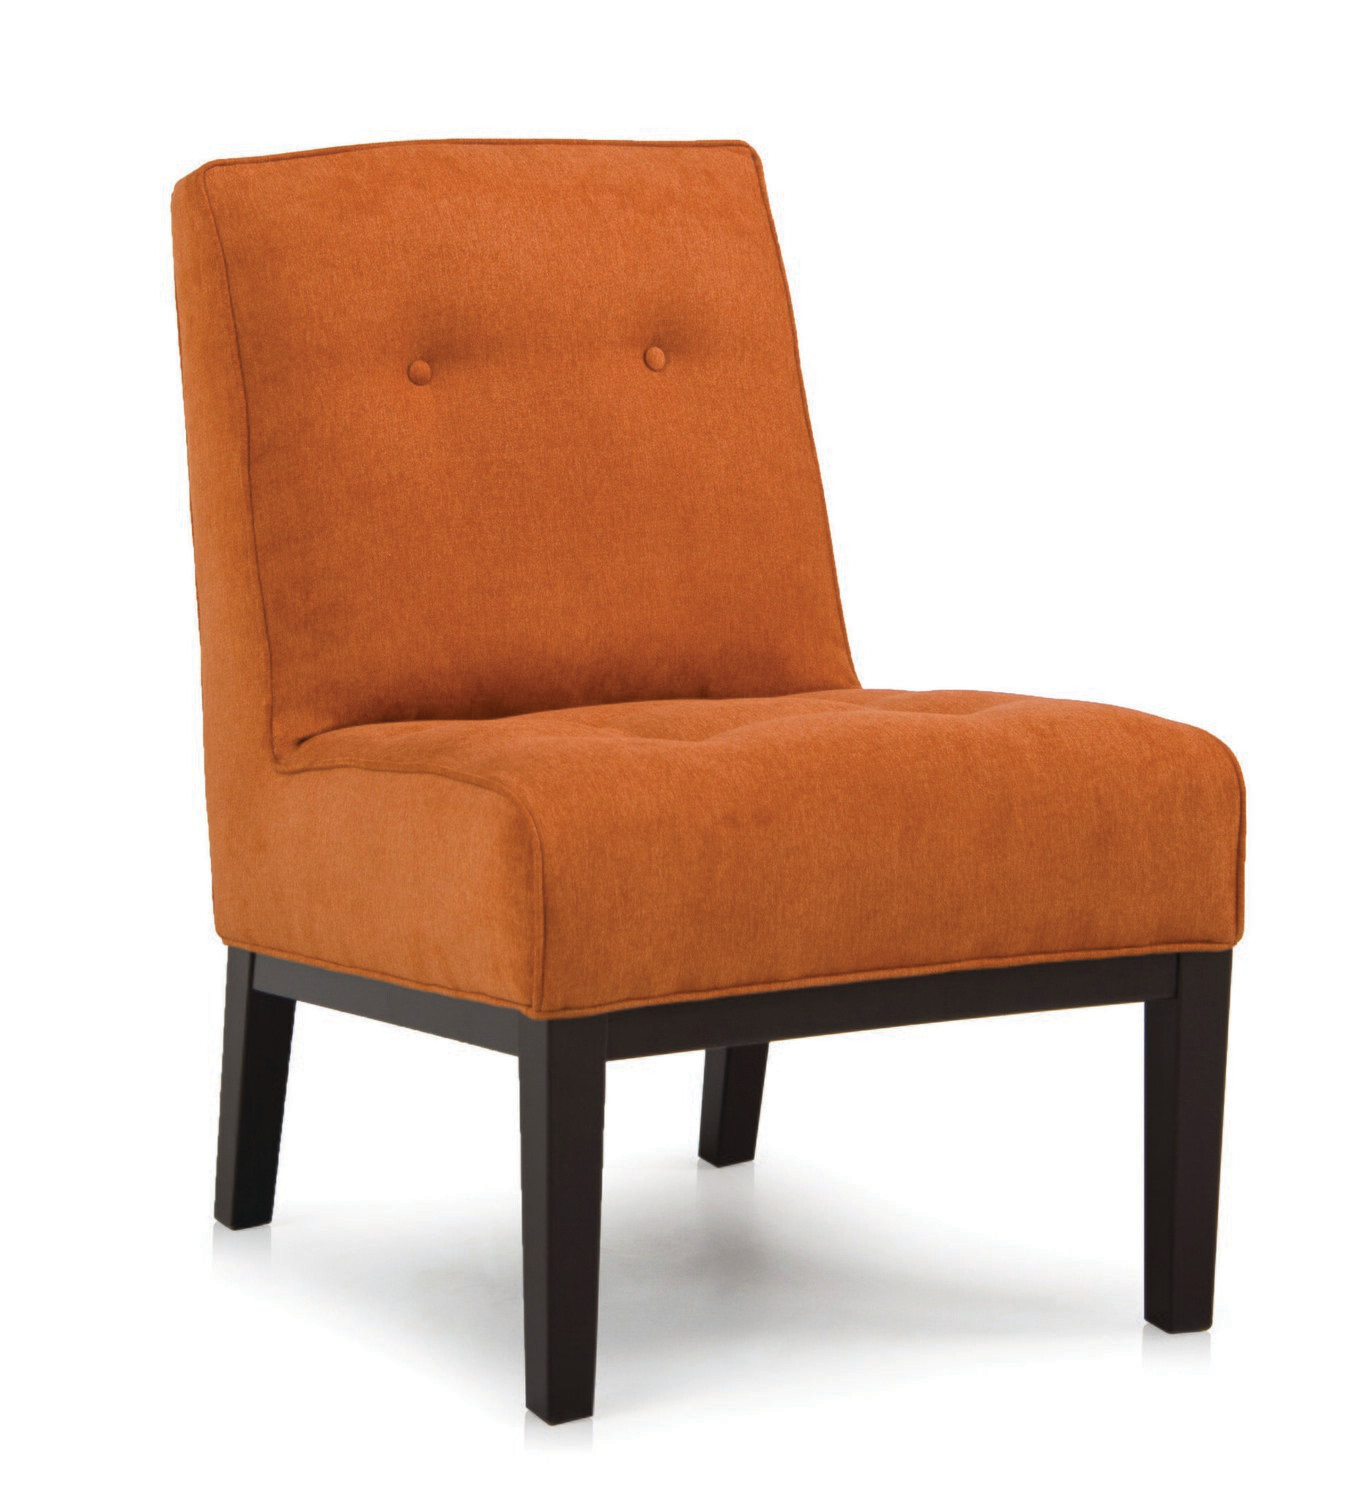 Smith Brothers 995 Accent Chair